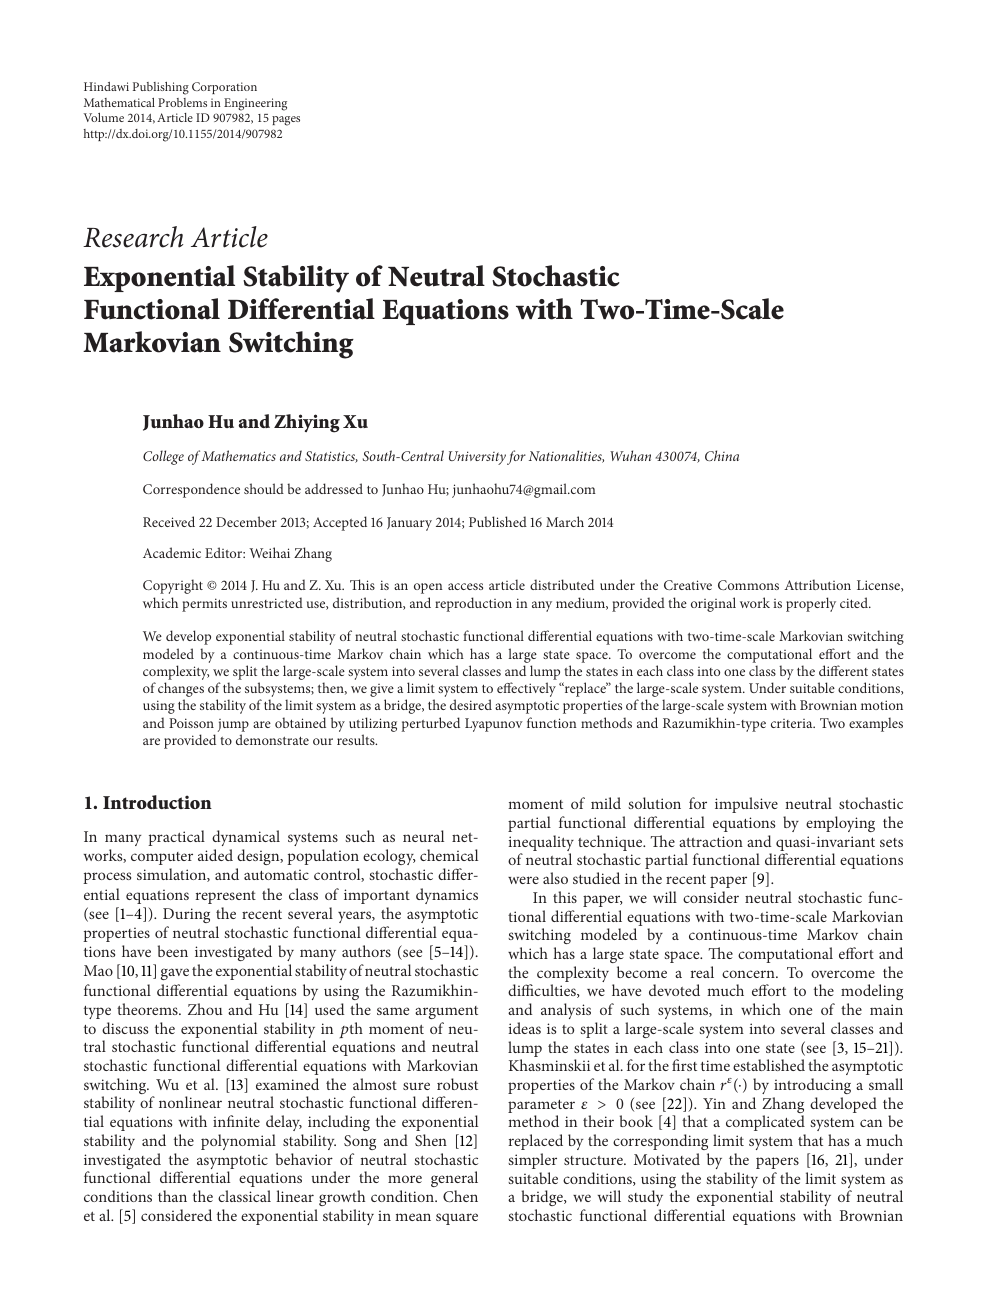 Exponential Stability Of Neutral Stochastic Functional Differential Equations With Two Time Scale Markovian Switching Topic Of Research Paper In Mathematics Download Scholarly Article Pdf And Read For Free On Cyberleninka Open Science Hub